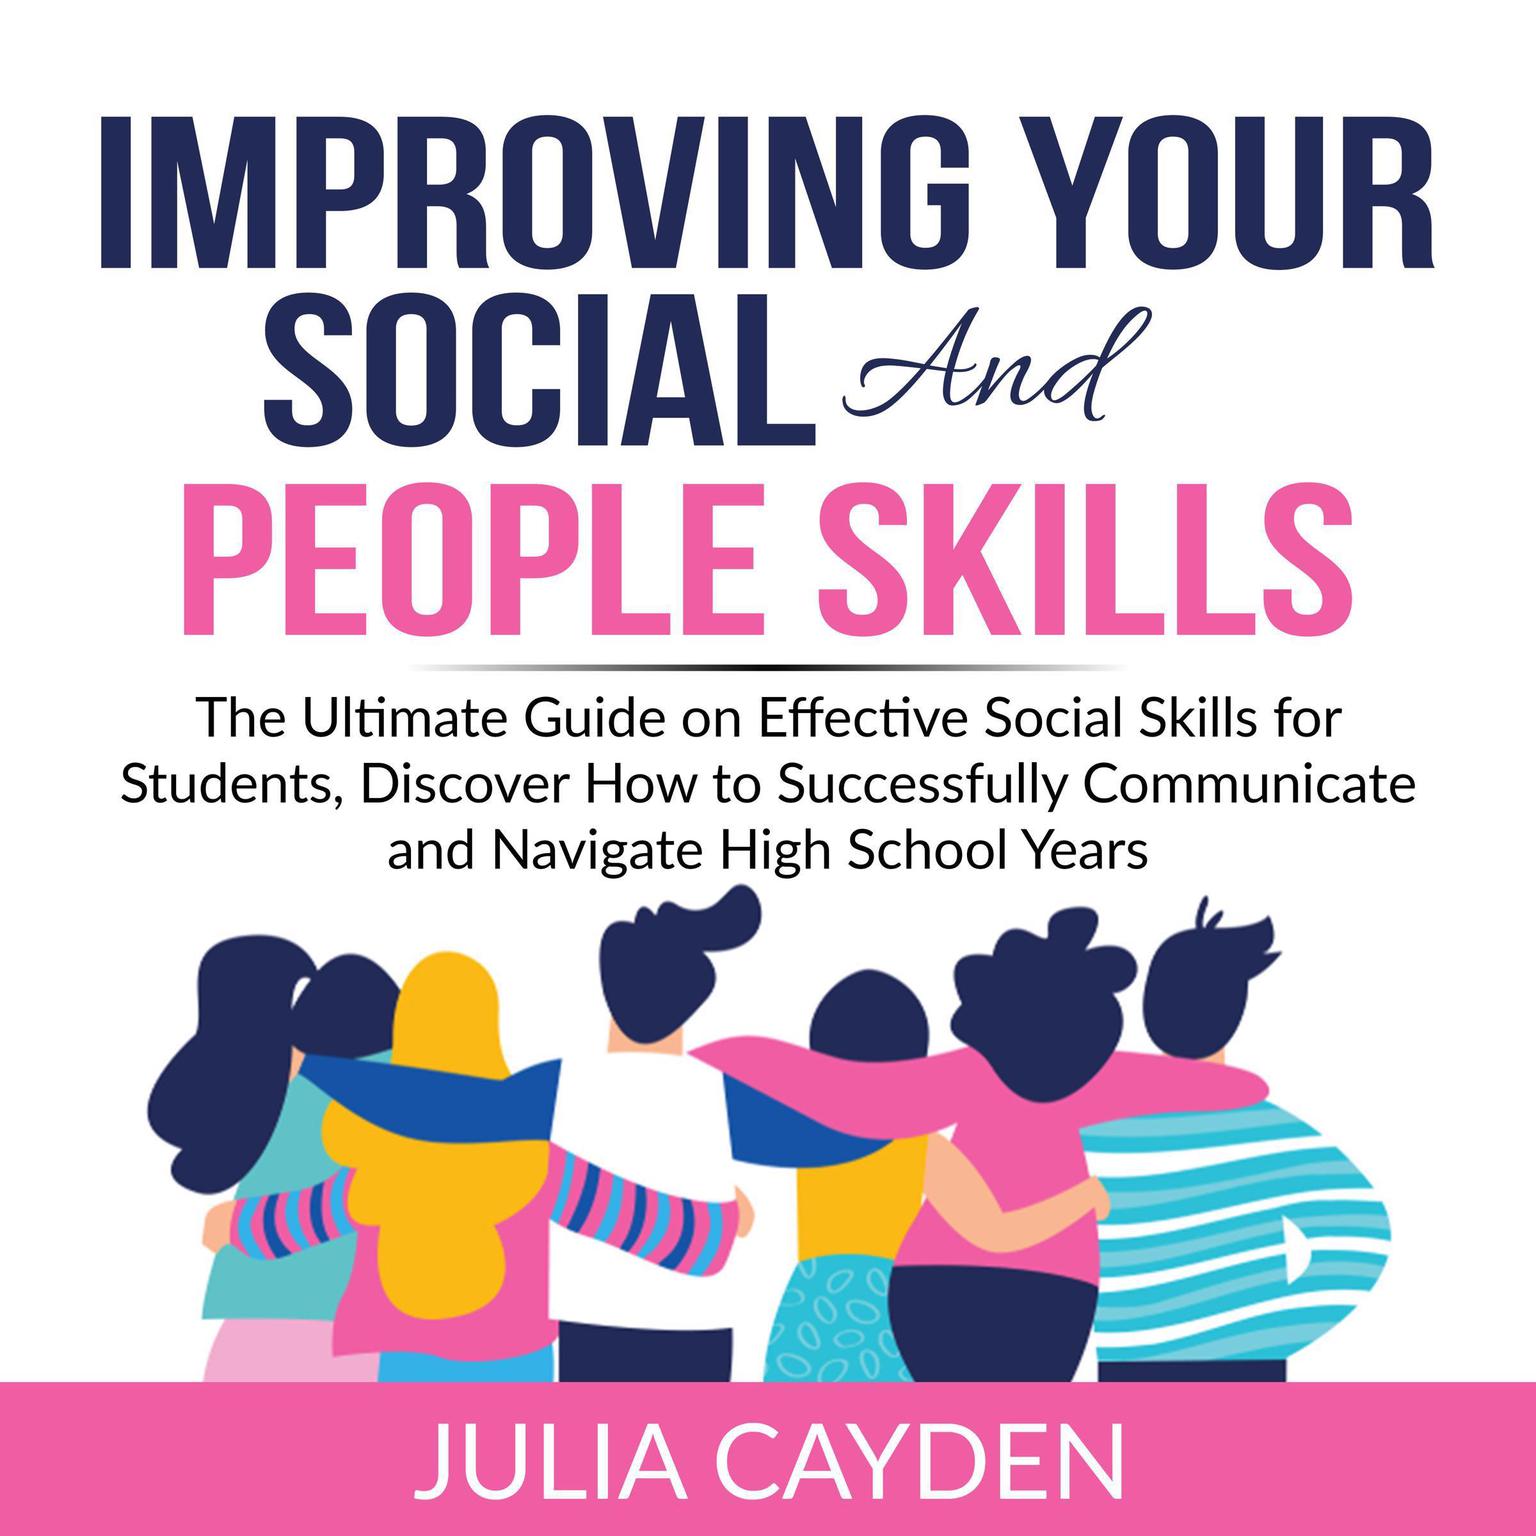 Improving Your Social and People Skills: The Ultimate Guide on Effective Social Skills for Students, Discover How to Successfully Communicate and Navigate High School Years  Audiobook, by Julia Cayden